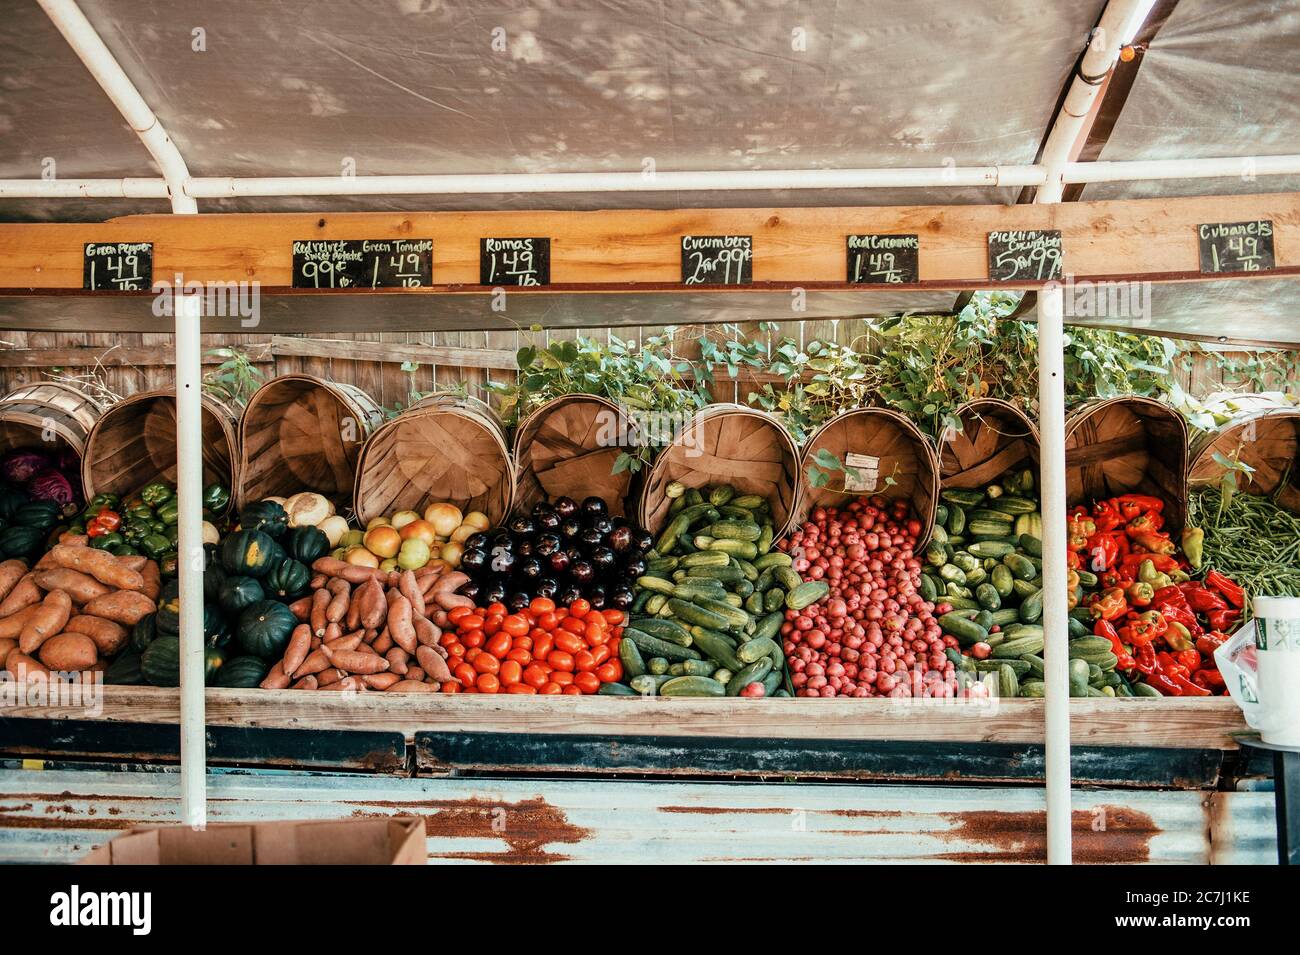 Fresh fruit and vegetable stand or roadside produce market in Tampa Florida. Stock Photo